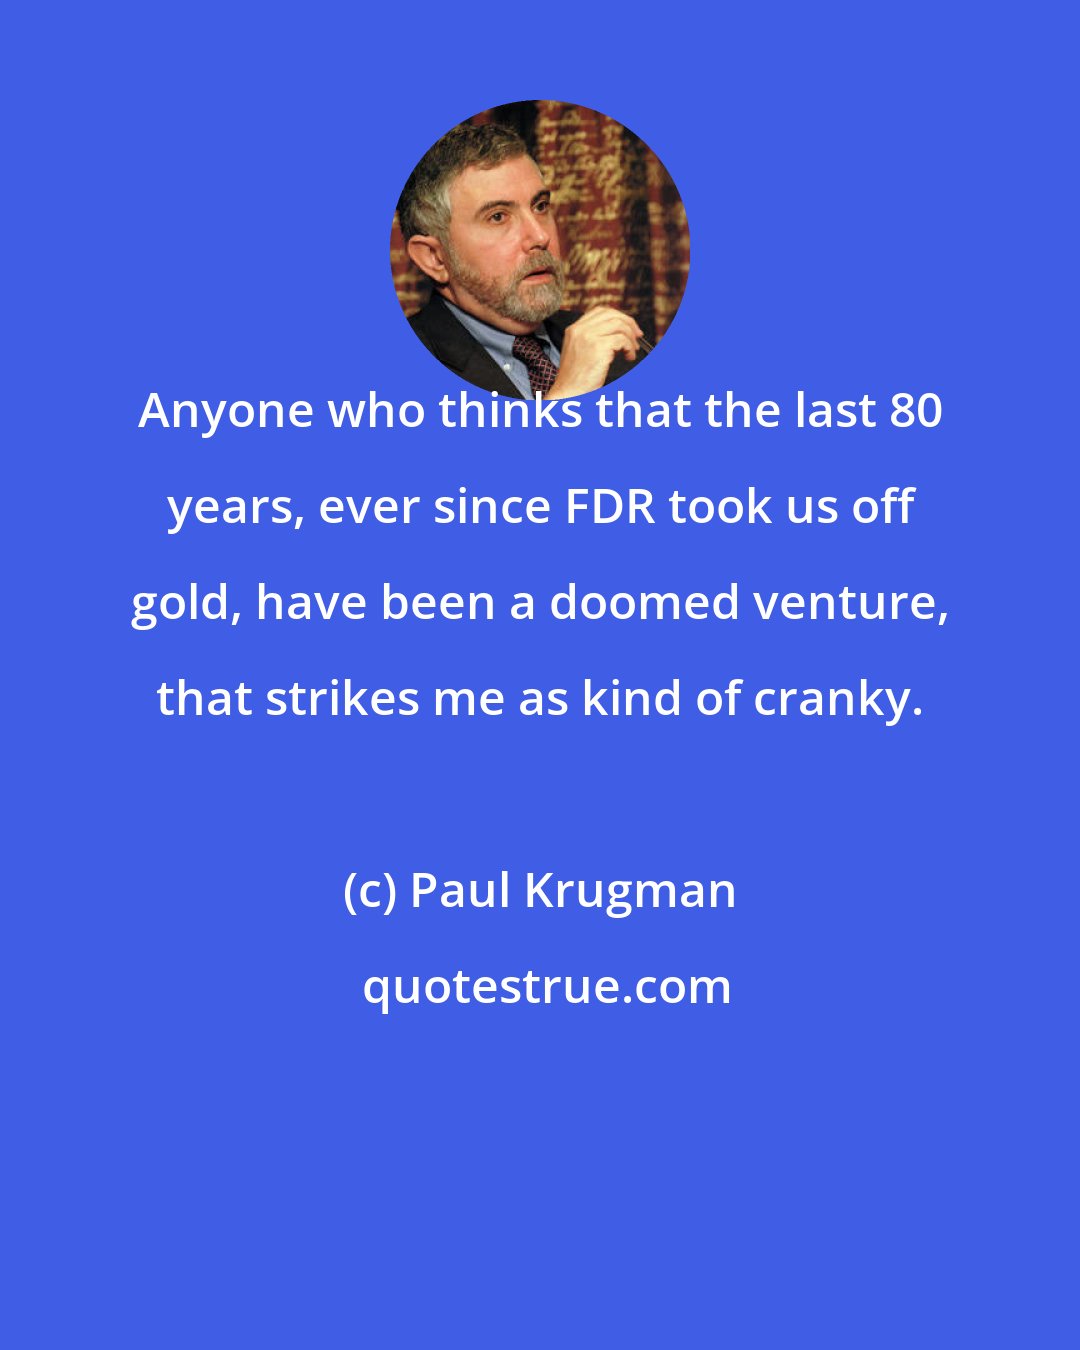 Paul Krugman: Anyone who thinks that the last 80 years, ever since FDR took us off gold, have been a doomed venture, that strikes me as kind of cranky.